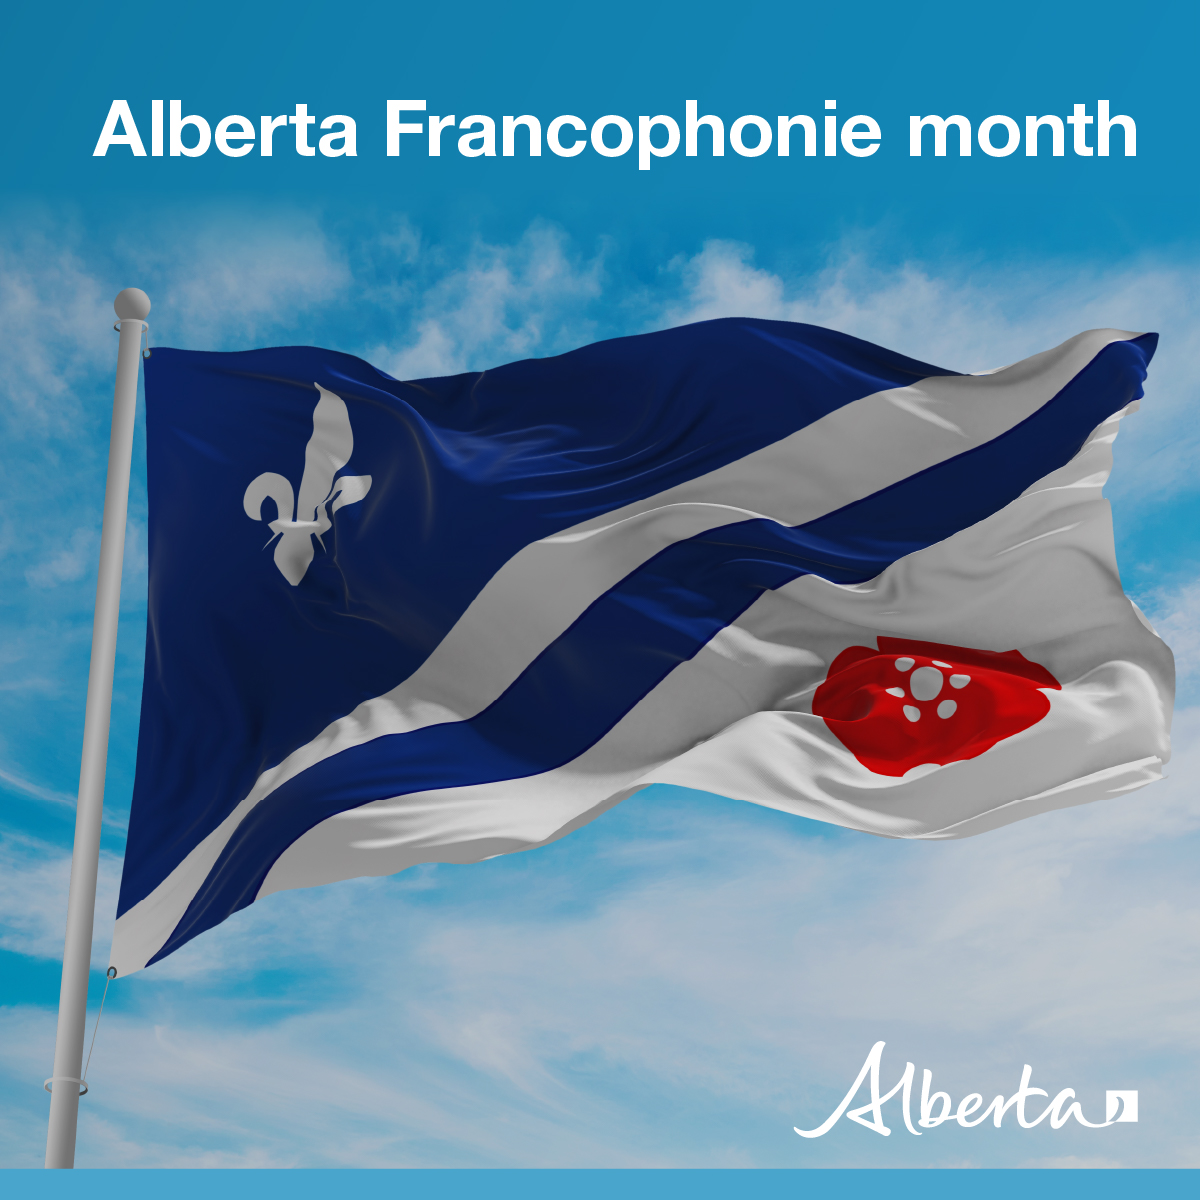 That’s a wrap! Thank you for celebrating Alberta Francophonie month with us. #moisFRAB

To access services and resources in French all year round, and learn about Alberta’s French Policy and francophone heritage, visit: alberta.ca/bonjour-albert…